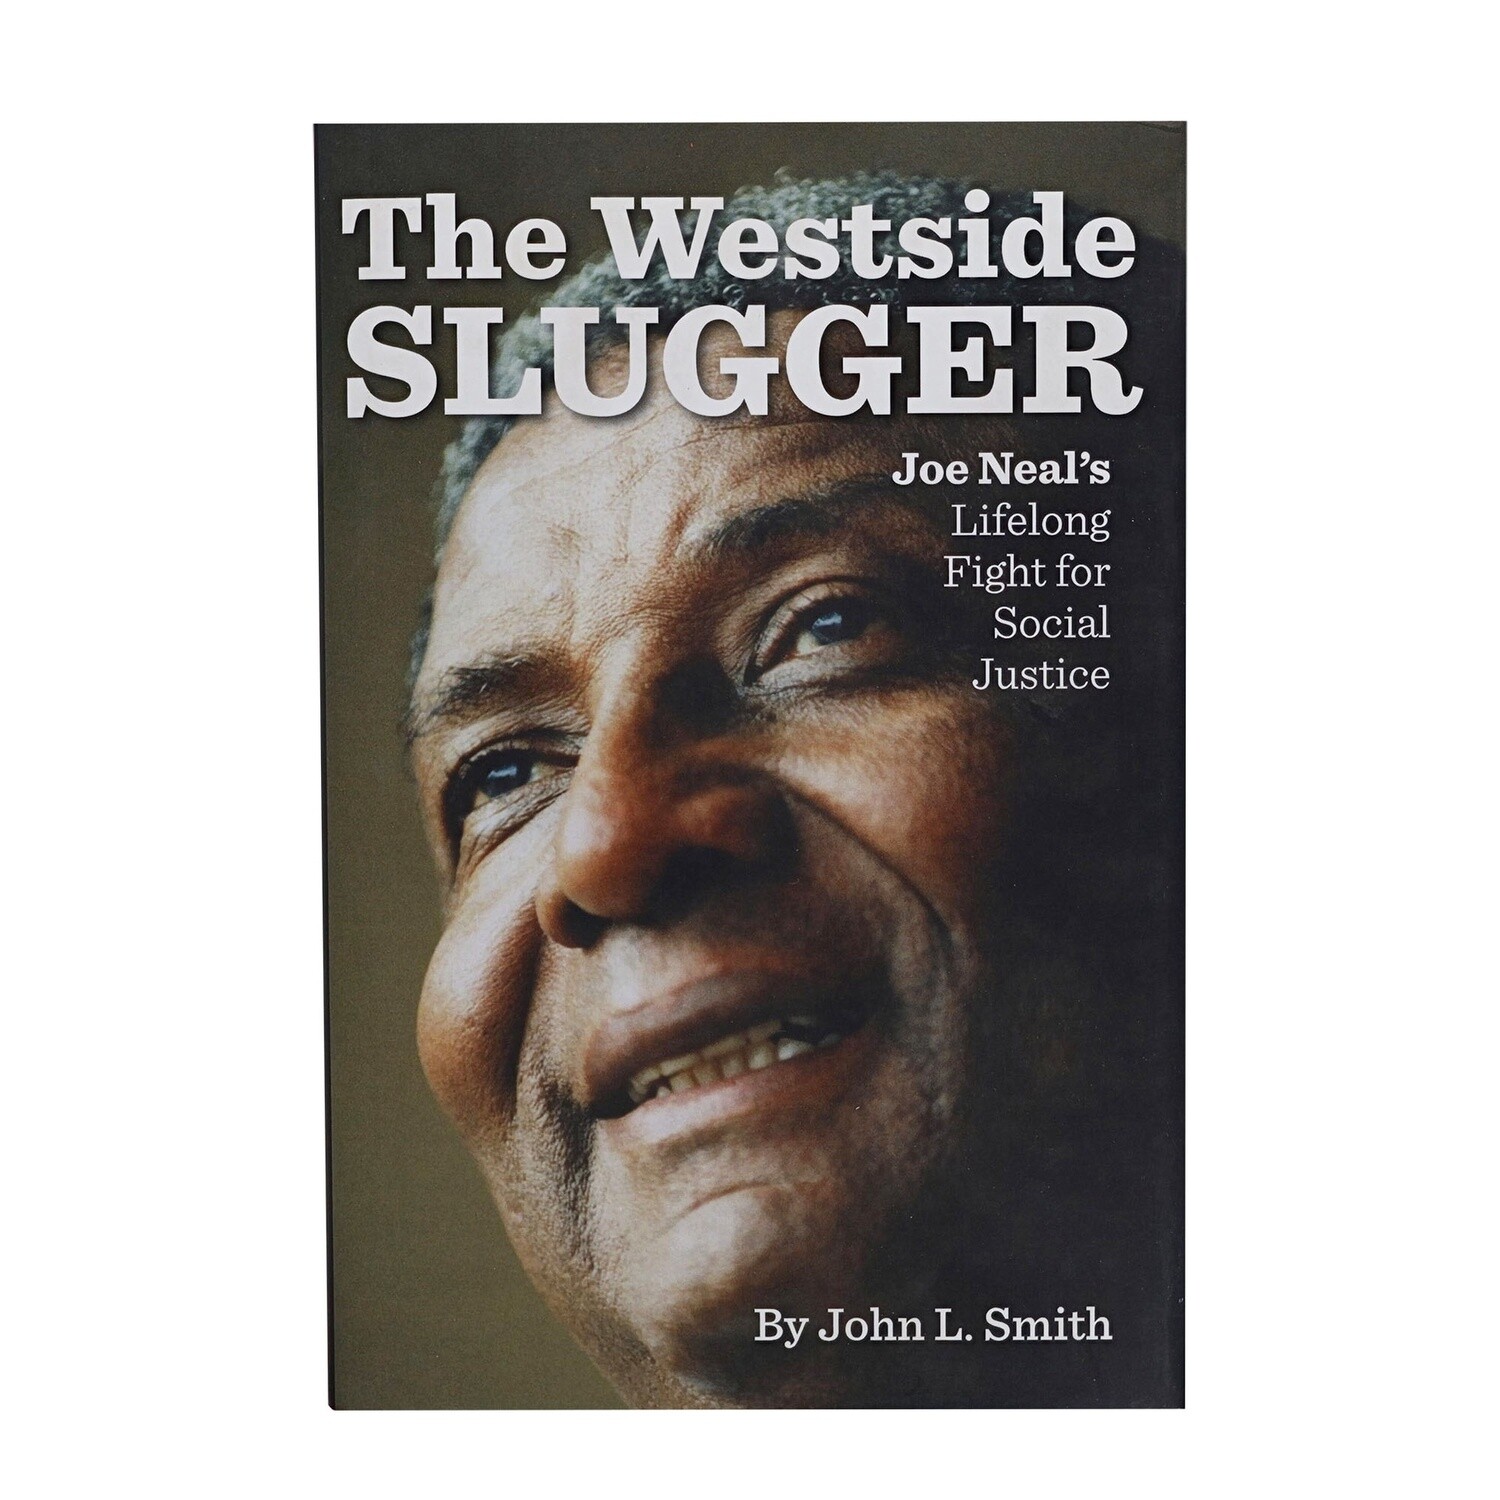 The Westside Slugger Joe Neal's Lifelong Fight for Social Justice by John L. Smith